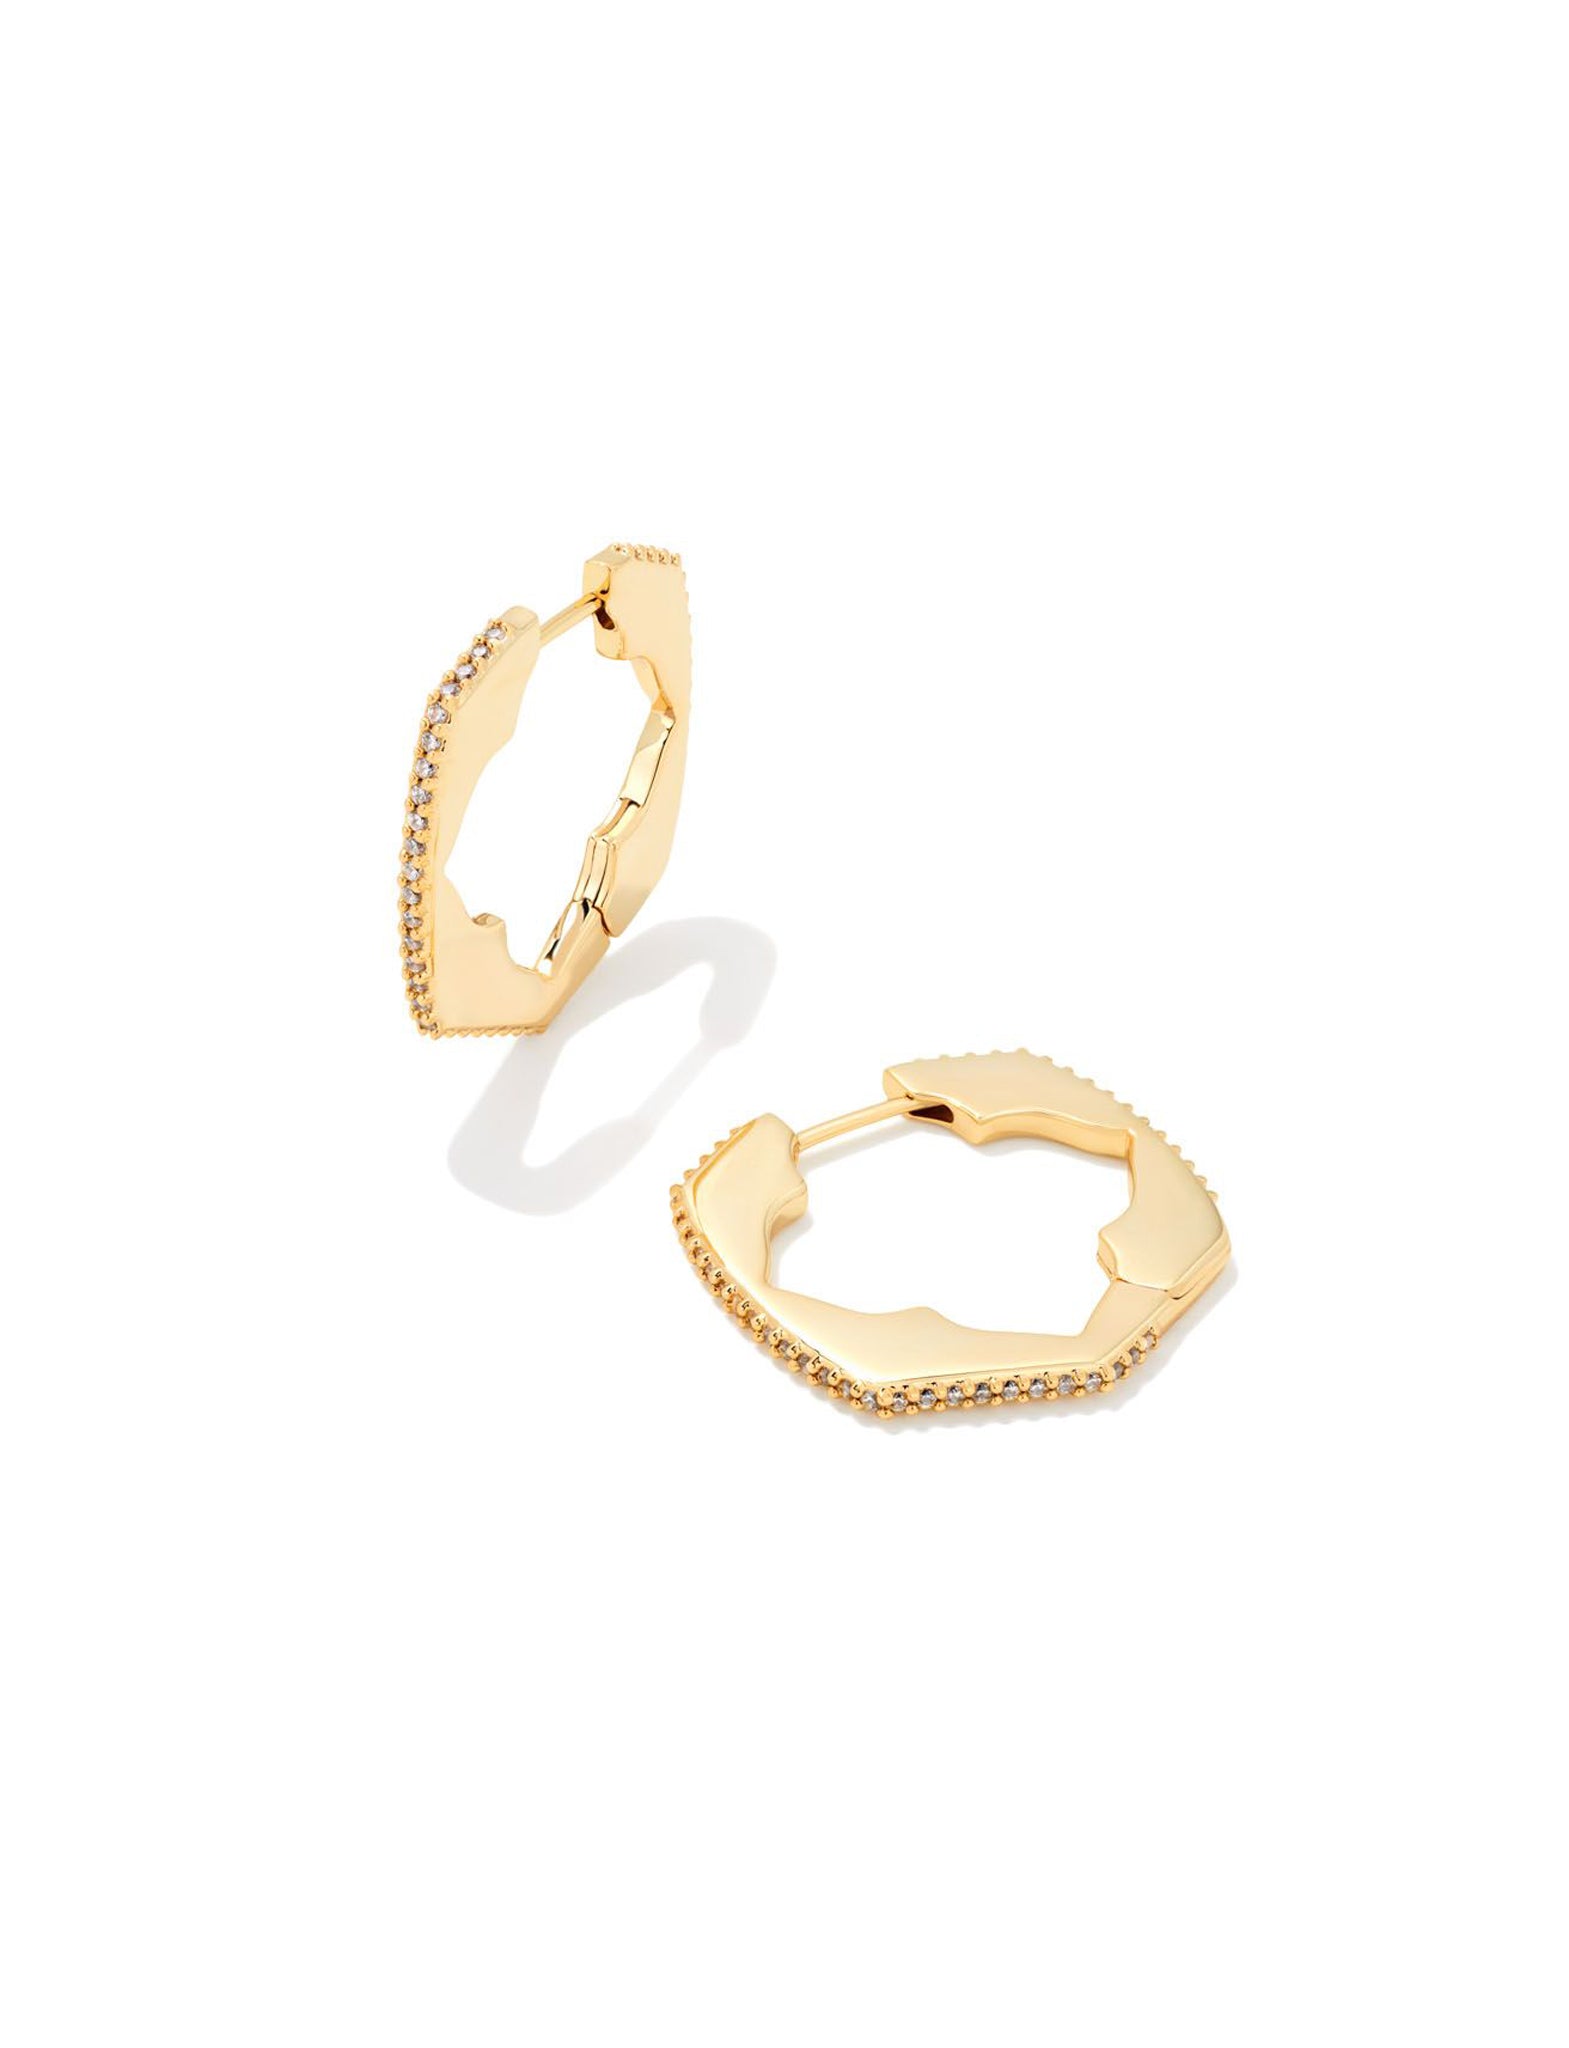 Kendra Scott Mallory Huggie Hoop Logo Earrings in White Crystal and Gold Plated